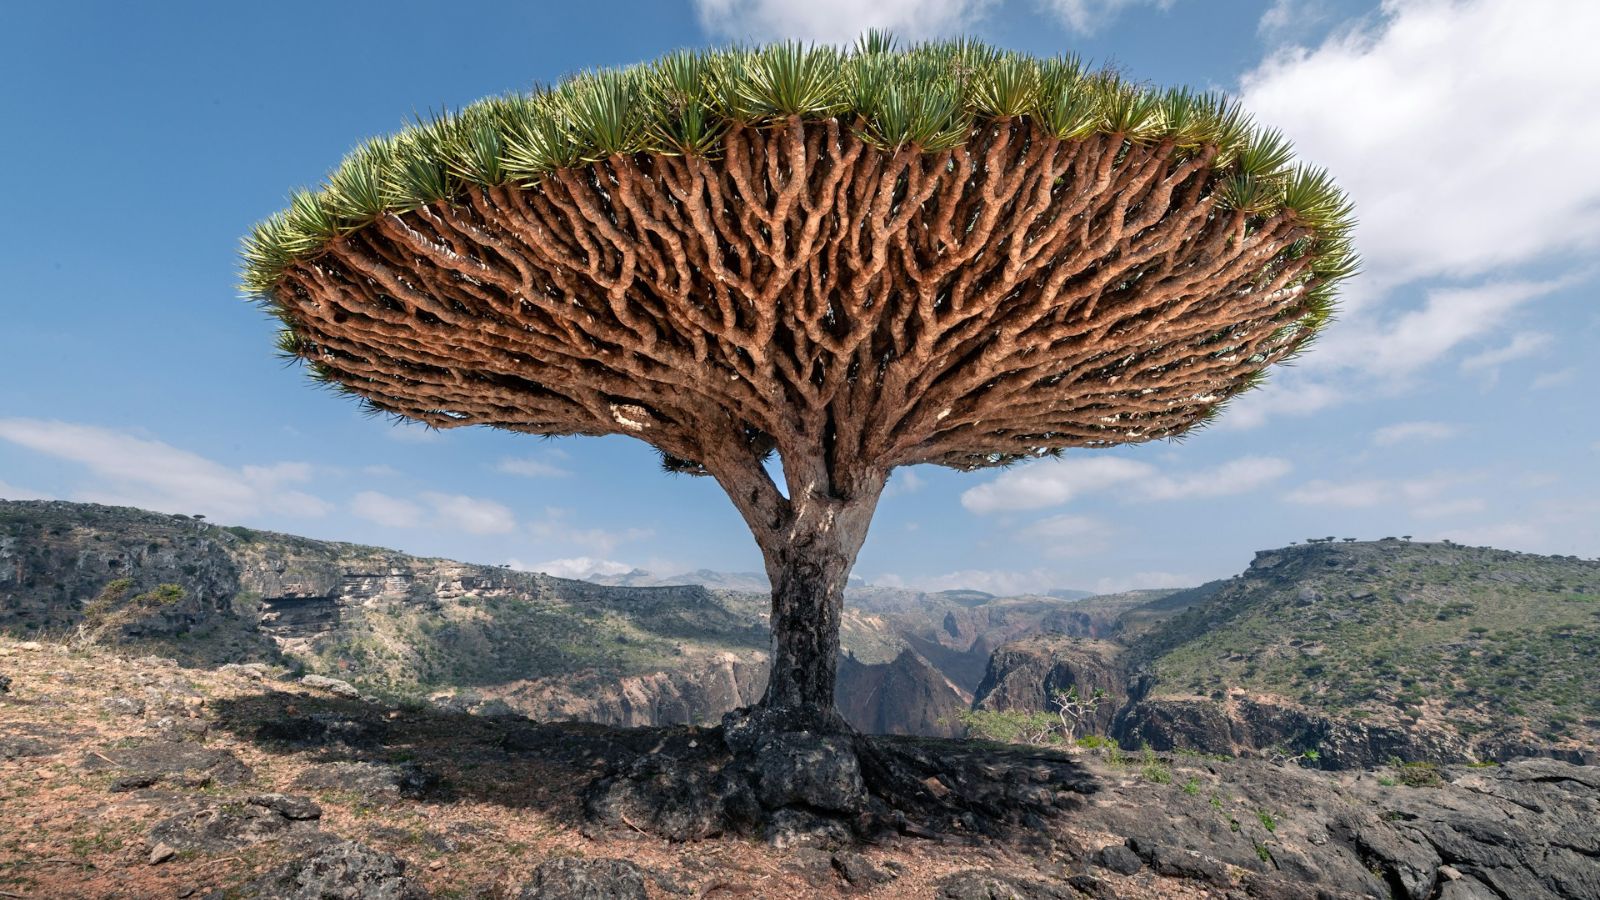 <p>Often described as the most alien-looking place on Earth, Socotra is famed for its Dragon’s Blood trees and unique biodiversity that looks lifted from a fantasy world.</p>